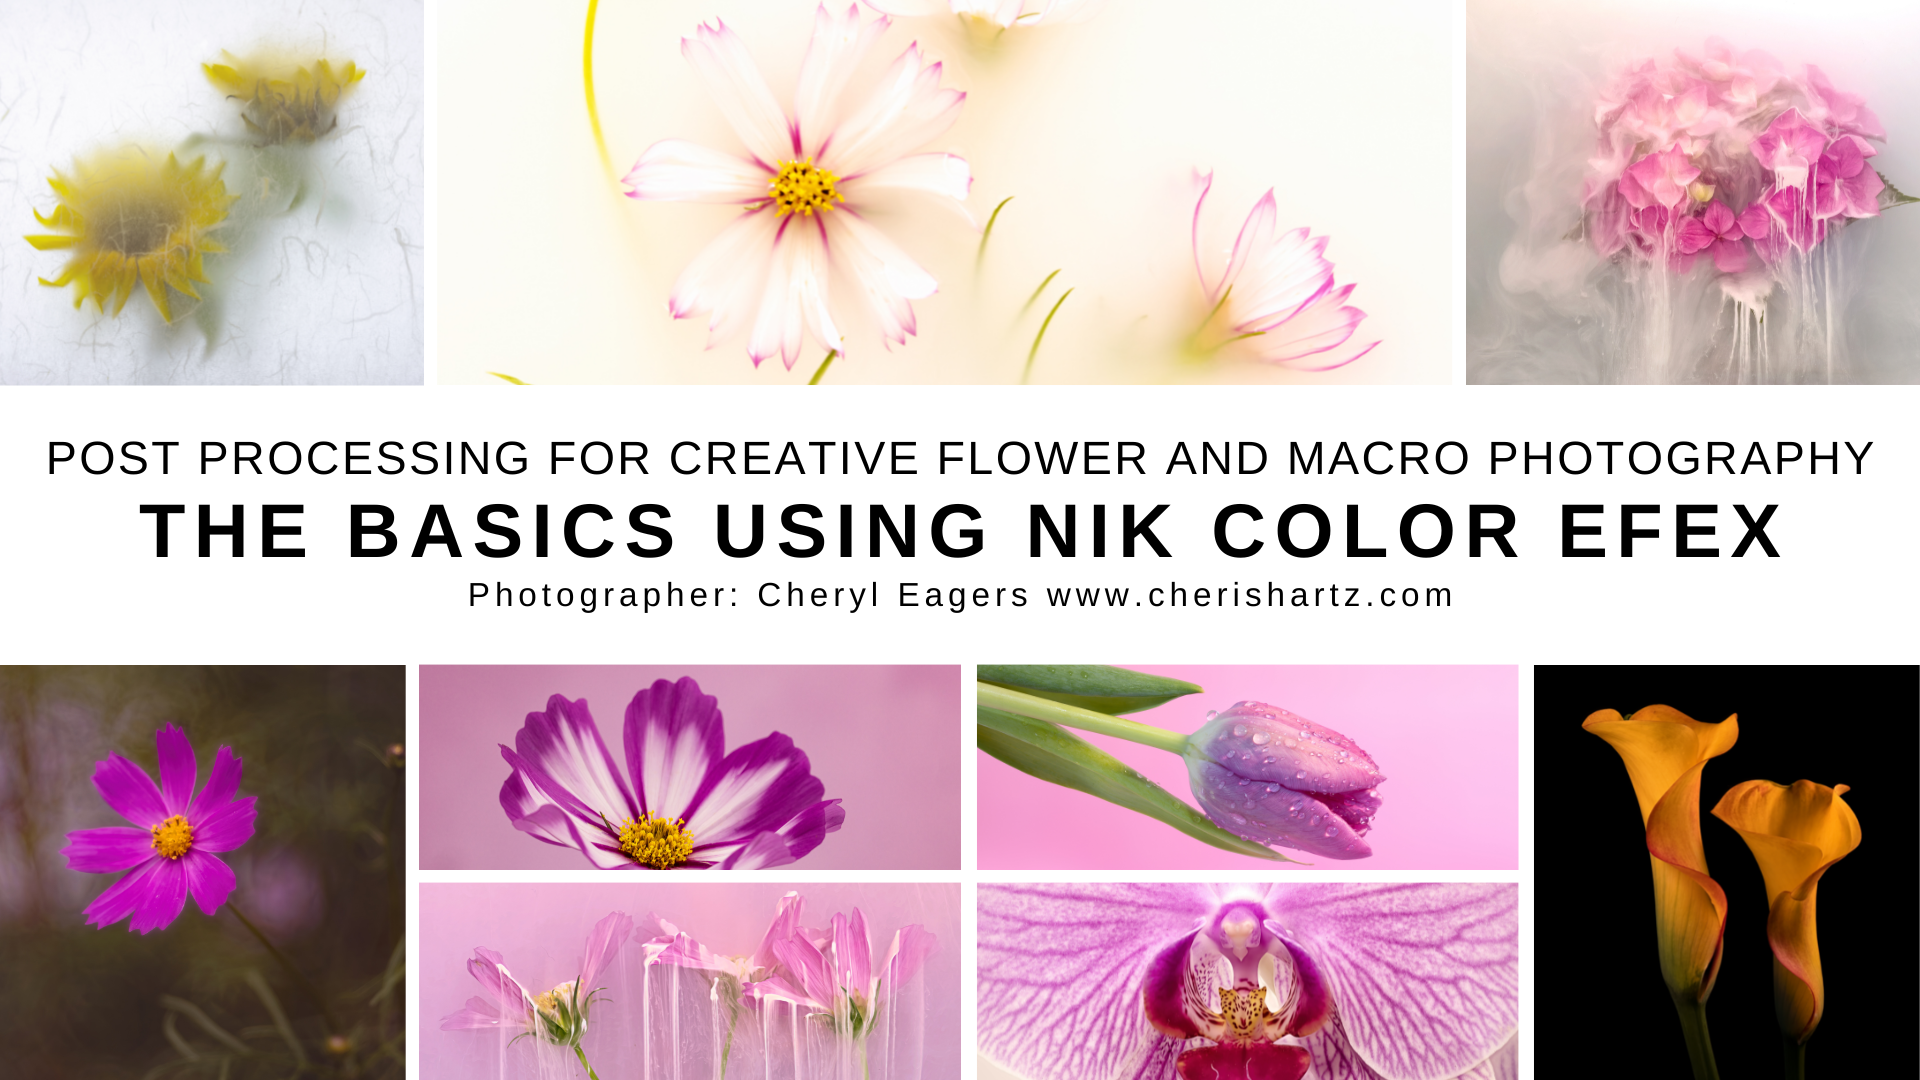 LEARN HOW TO USE NIK COLOUR EFEX DXO FOR YOUR MACRO FLOWER PHOTOGRAPHY